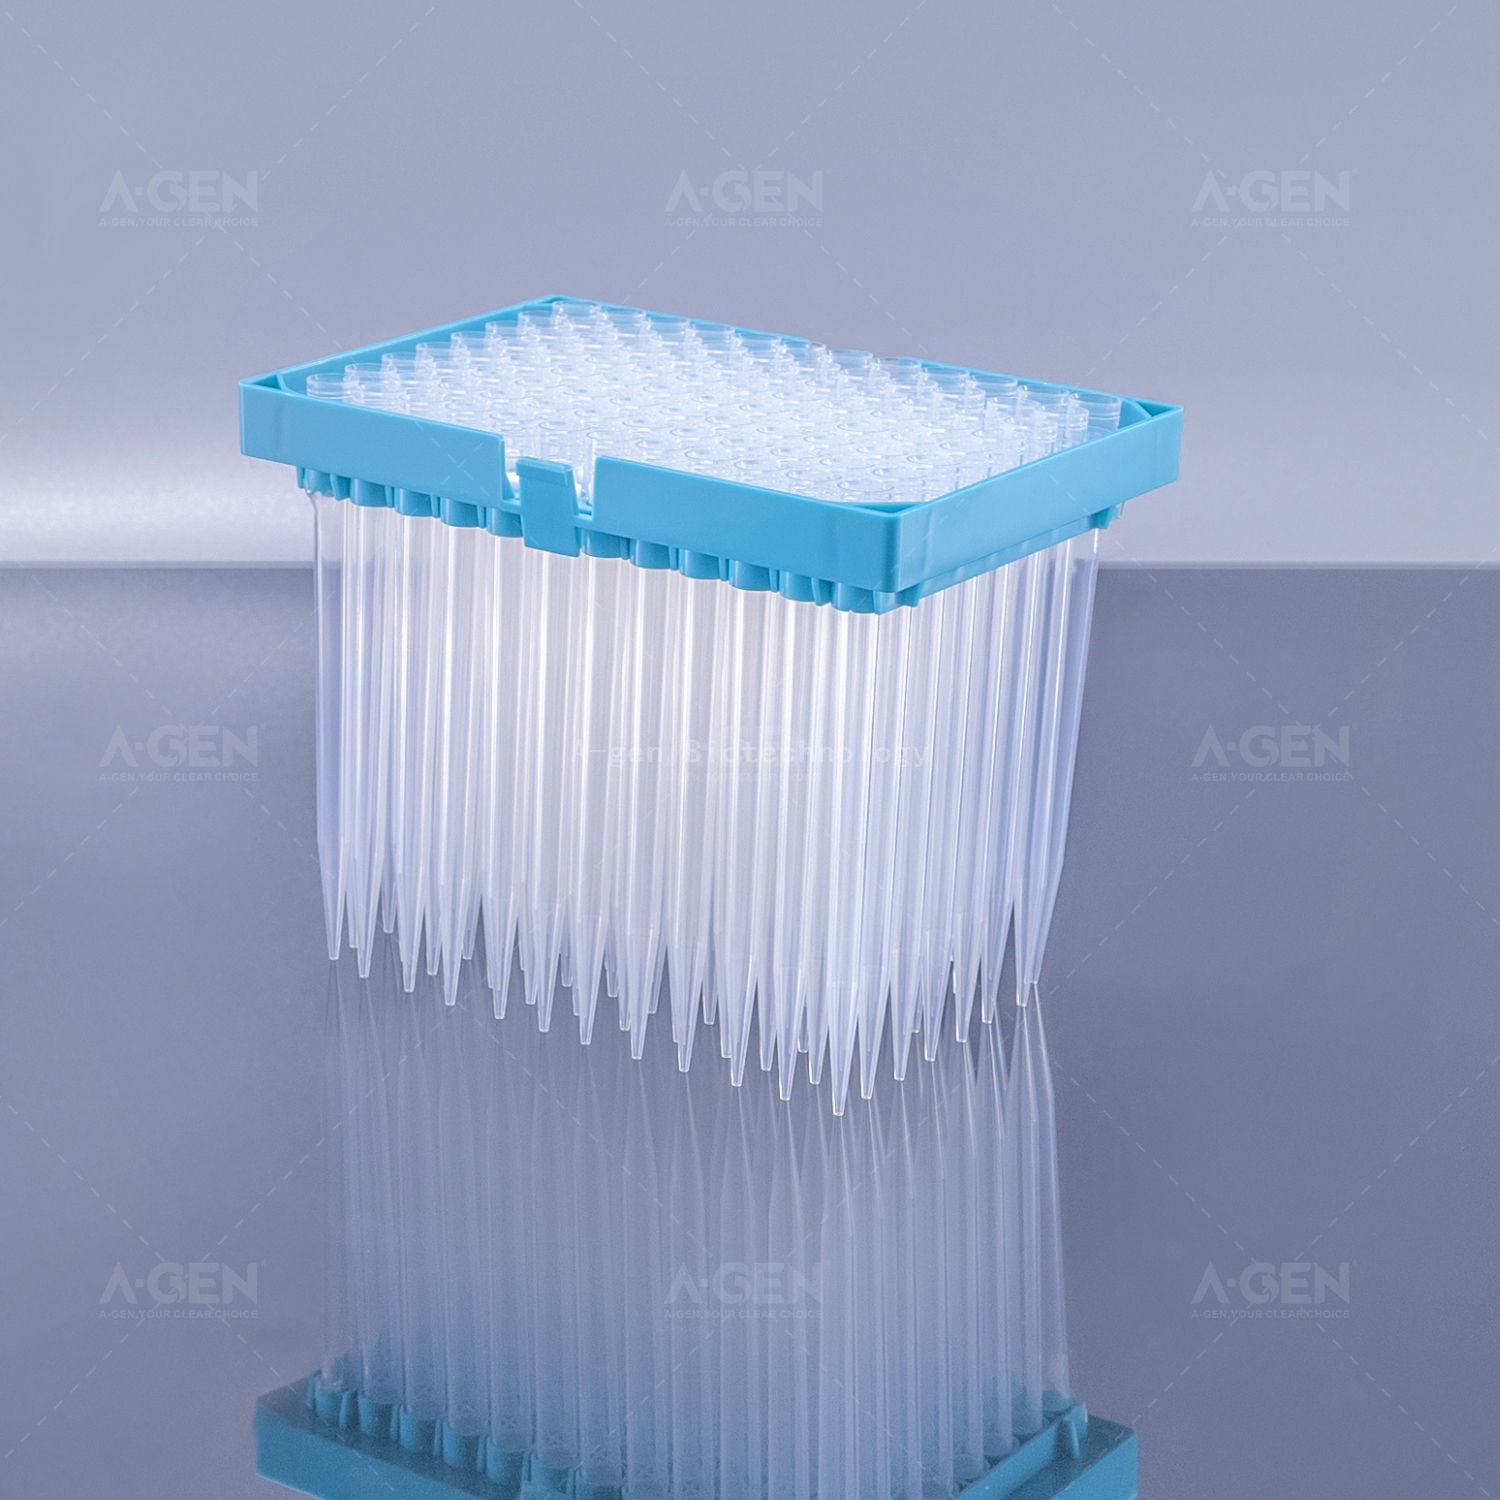 Hamilton Pipette Tip 1000μL Sterile Clear PP Pipette Tip in Rack for Liquid Transfer With Filter 